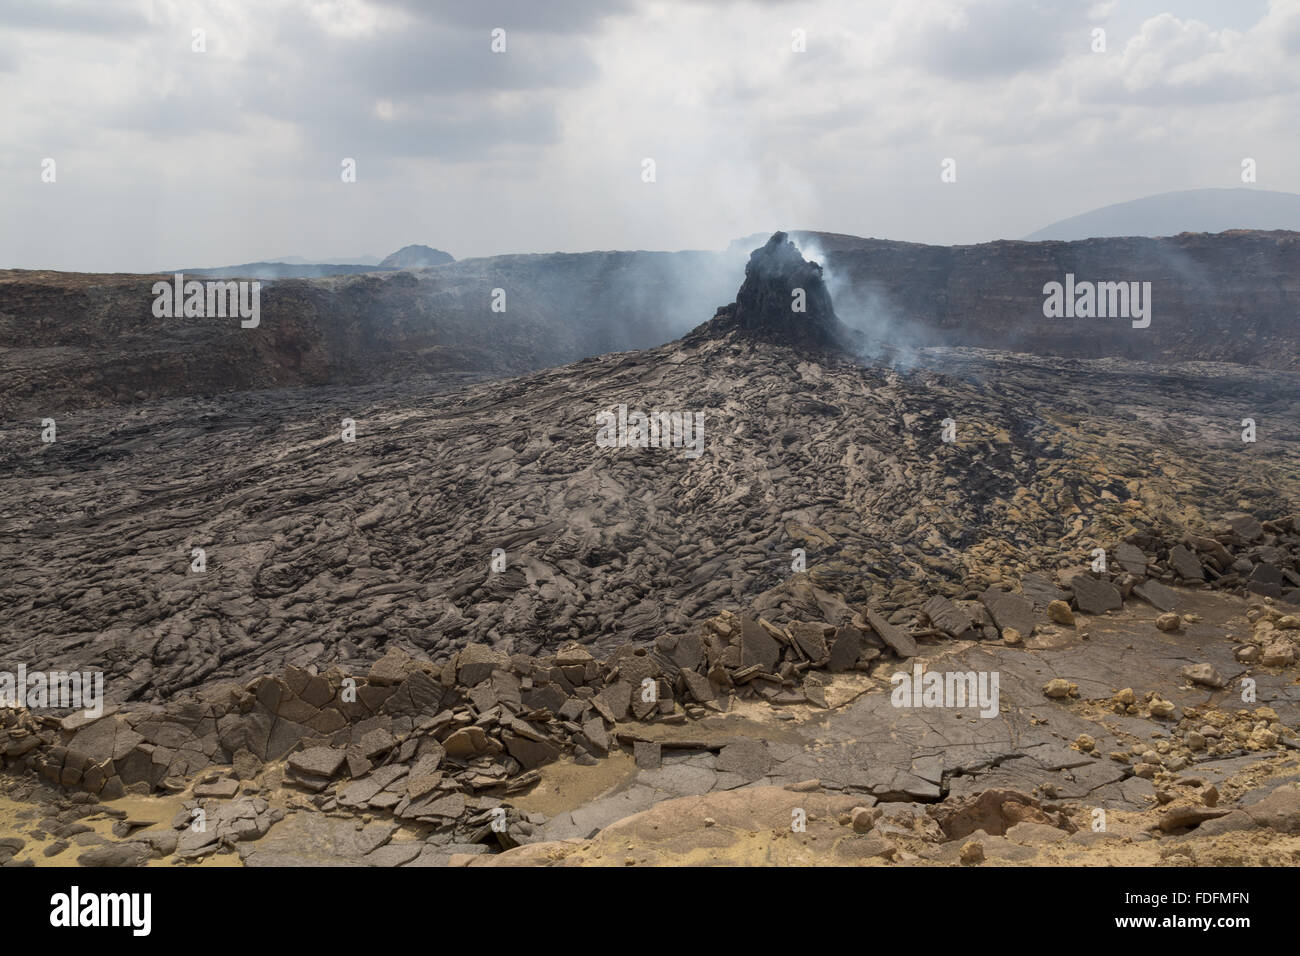 A steaming Hornito lies at the center of a sunken crater inside the main caldera of Erta Ale volcano, Ethiopia Stock Photo